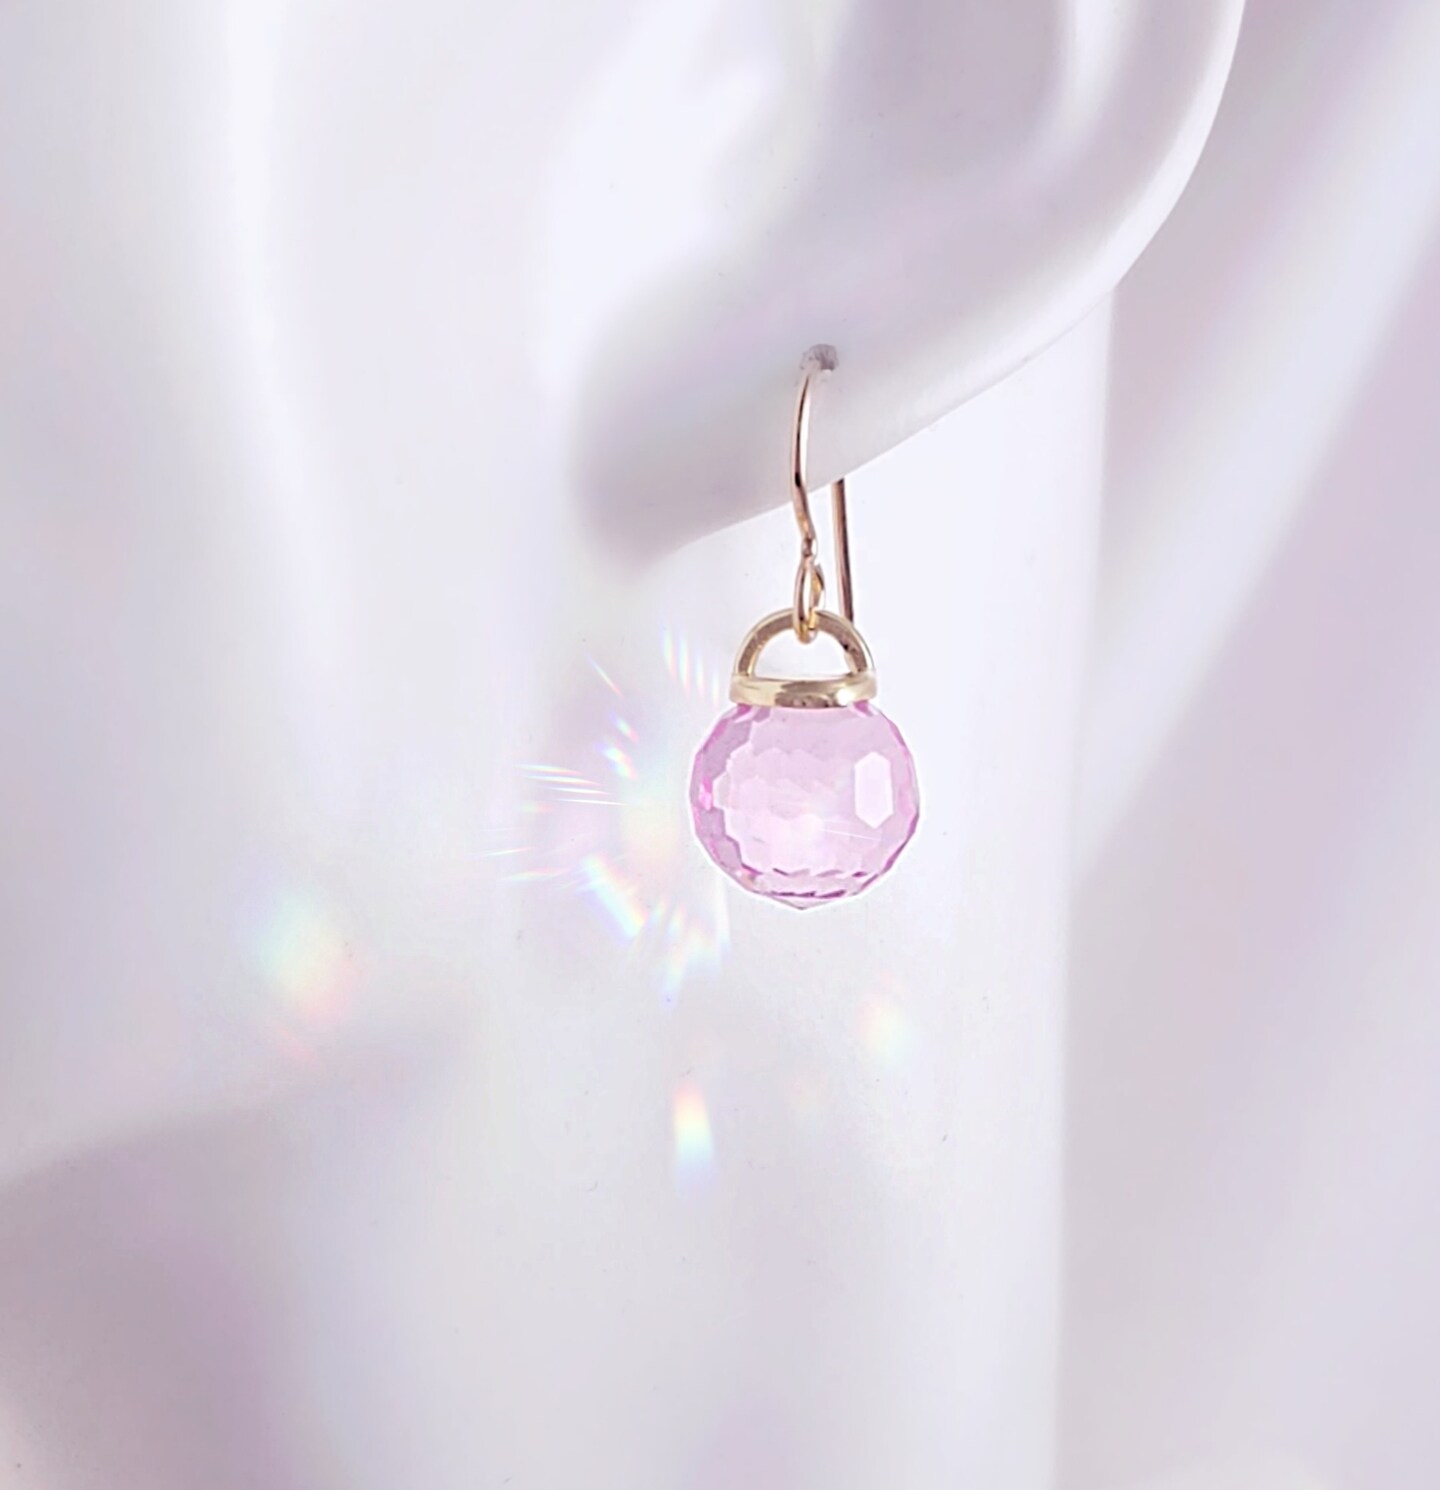 Share more than 216 crystal ball drop earrings super hot